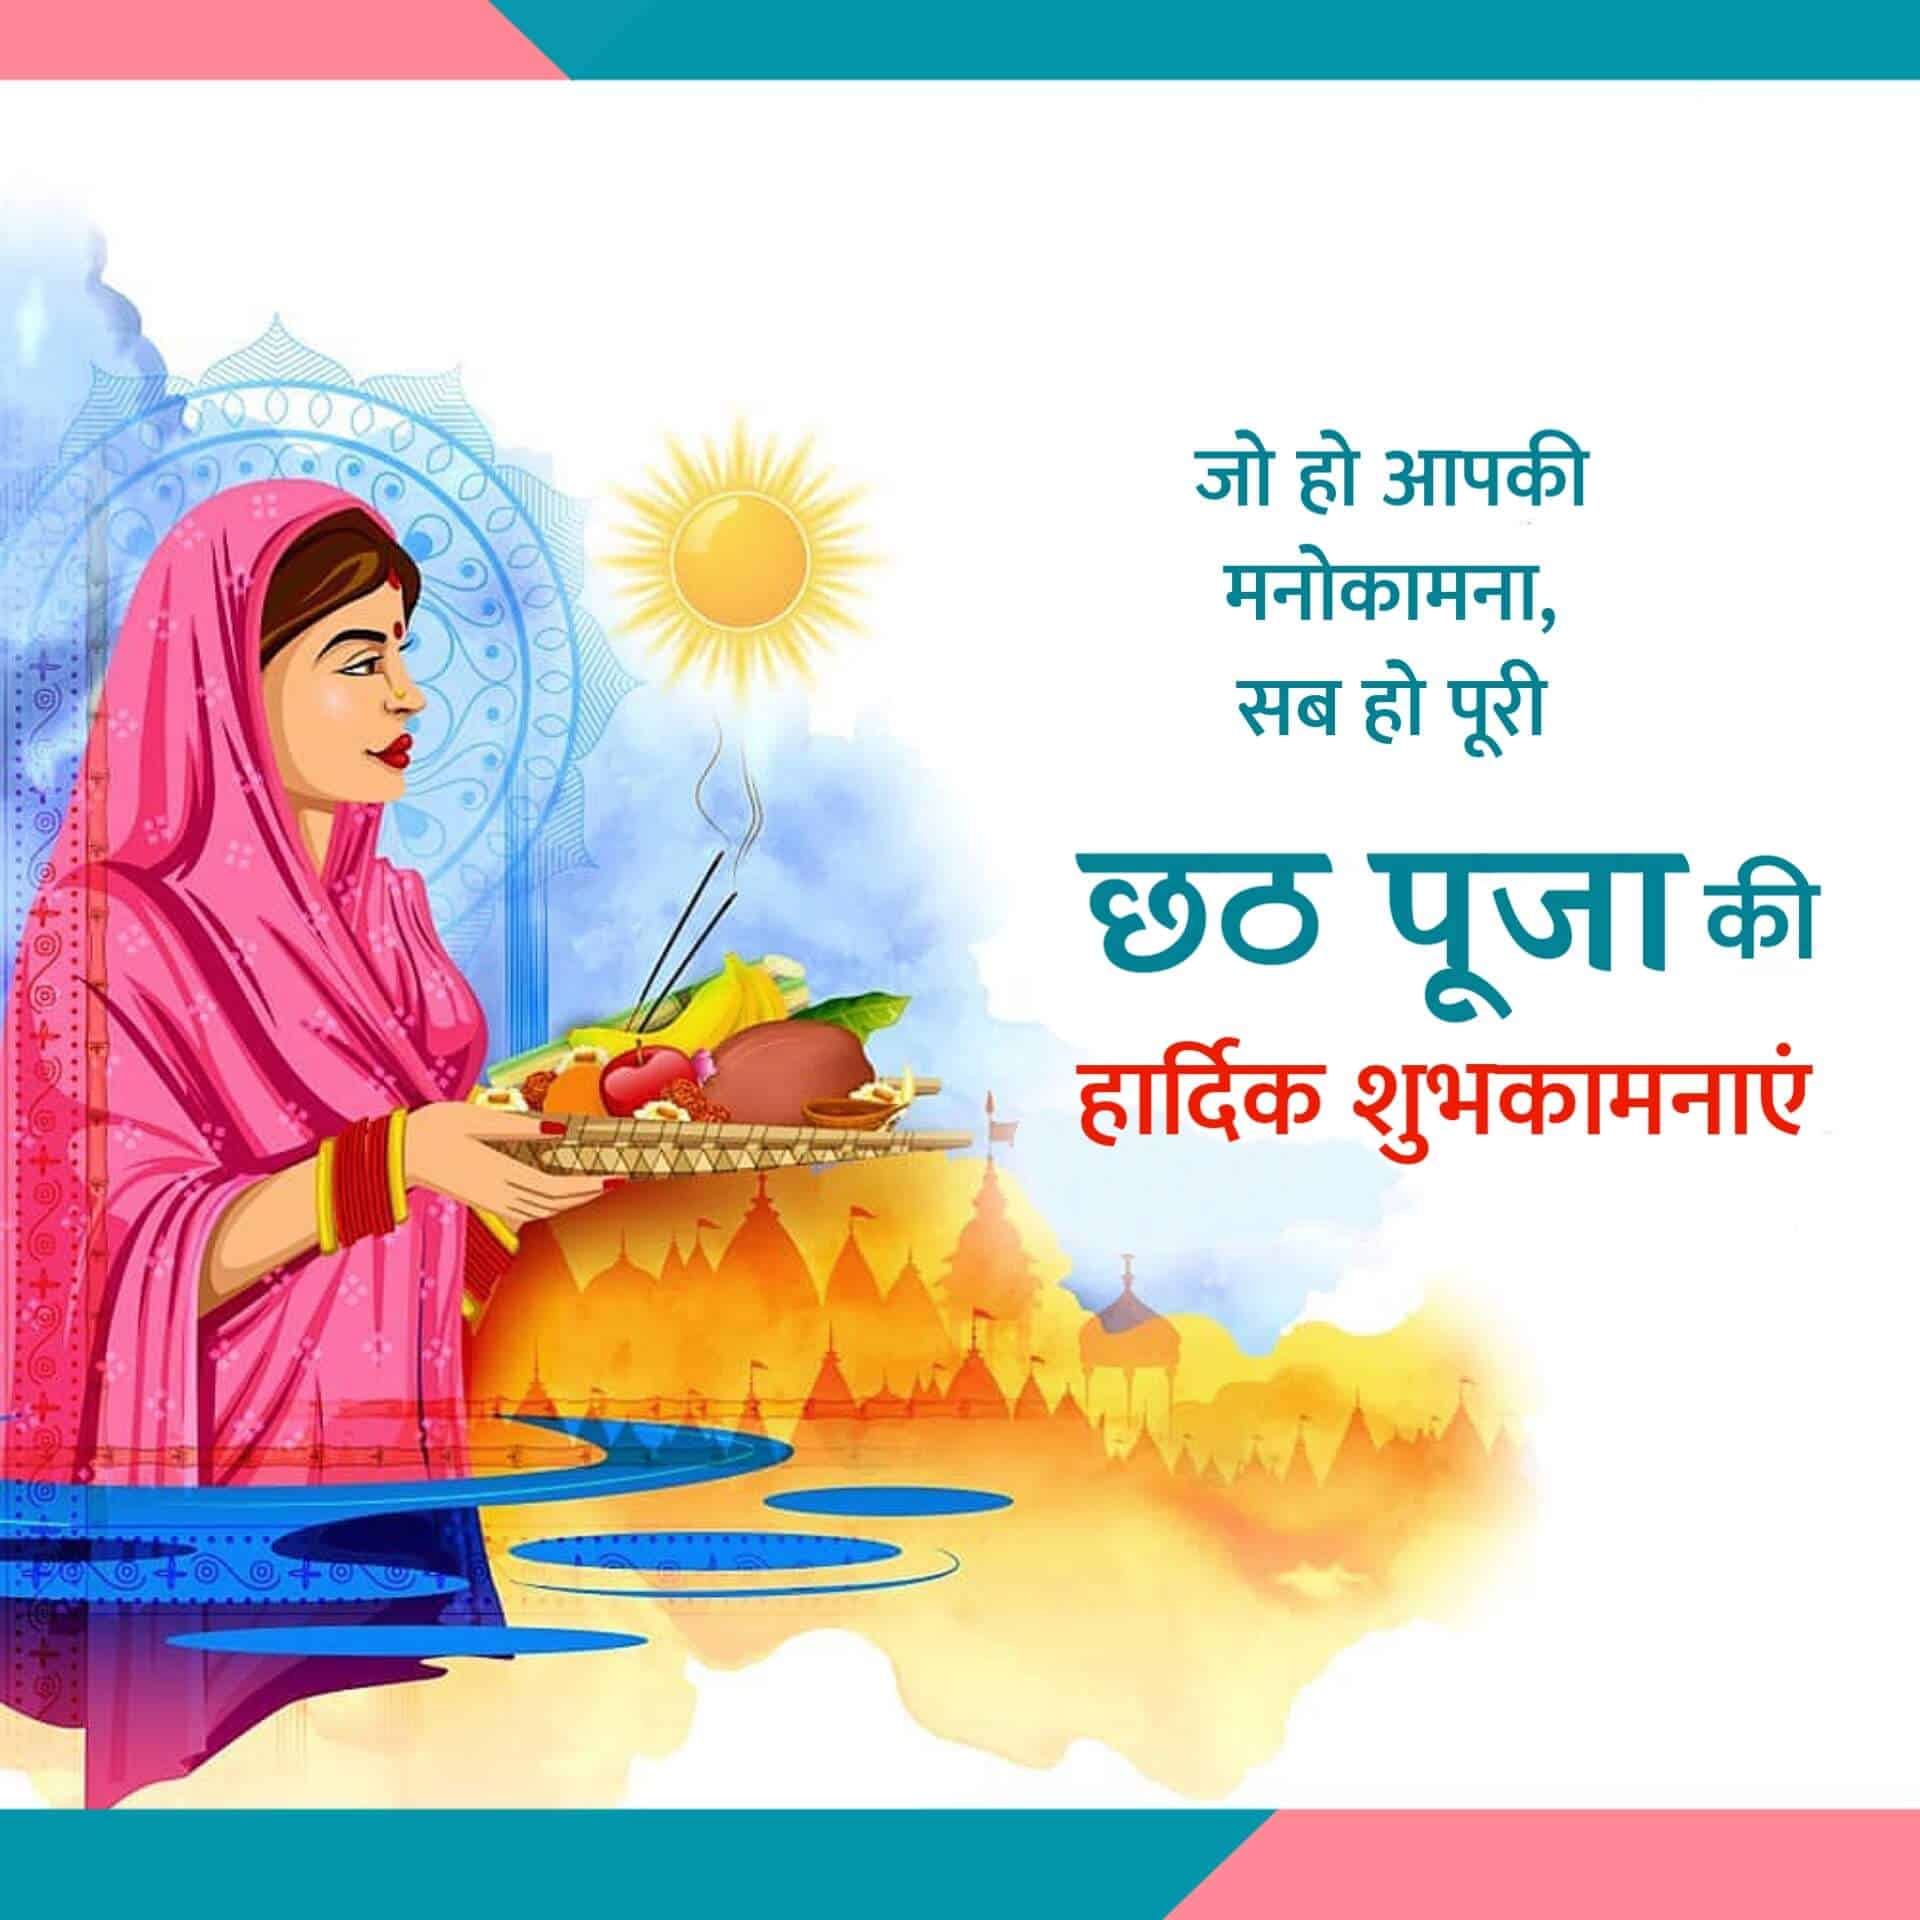 Chhath Puja Images in Hindi